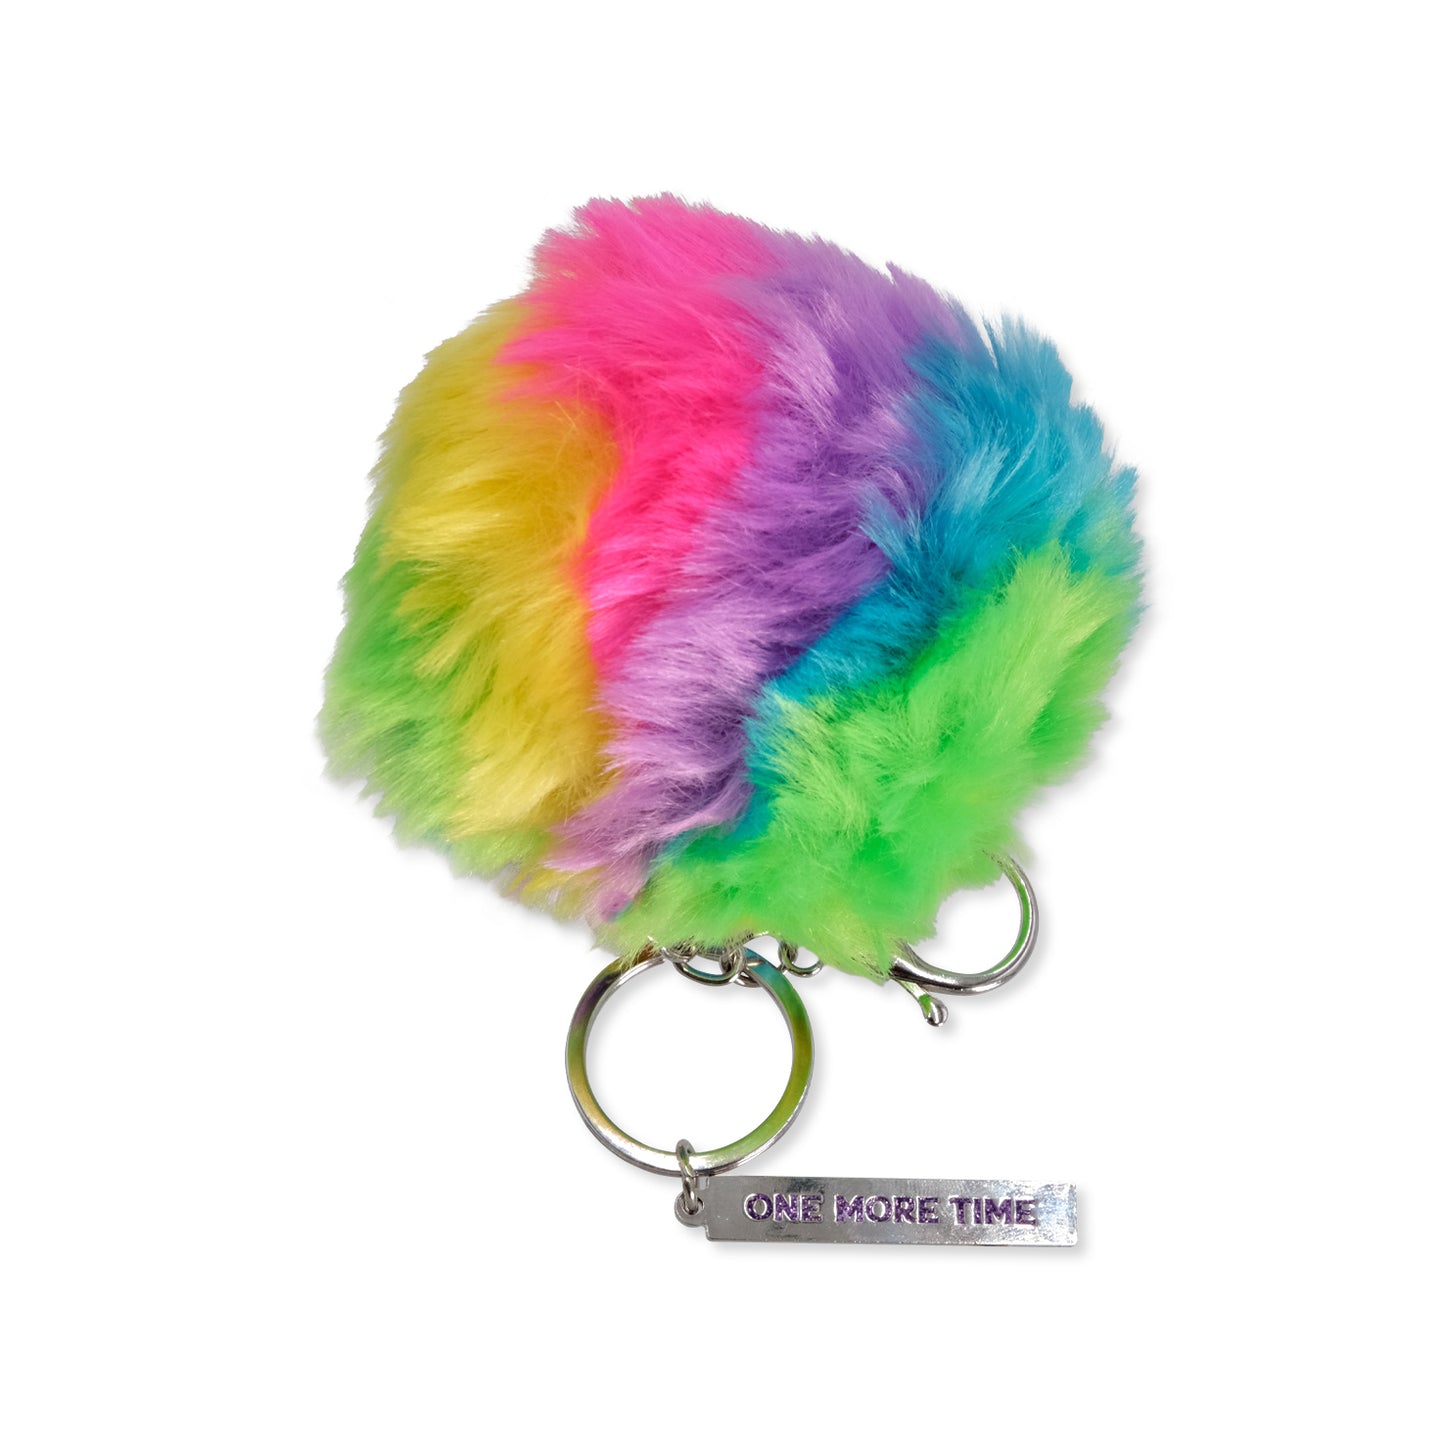 Once Upon A One More Time Puff Keychain